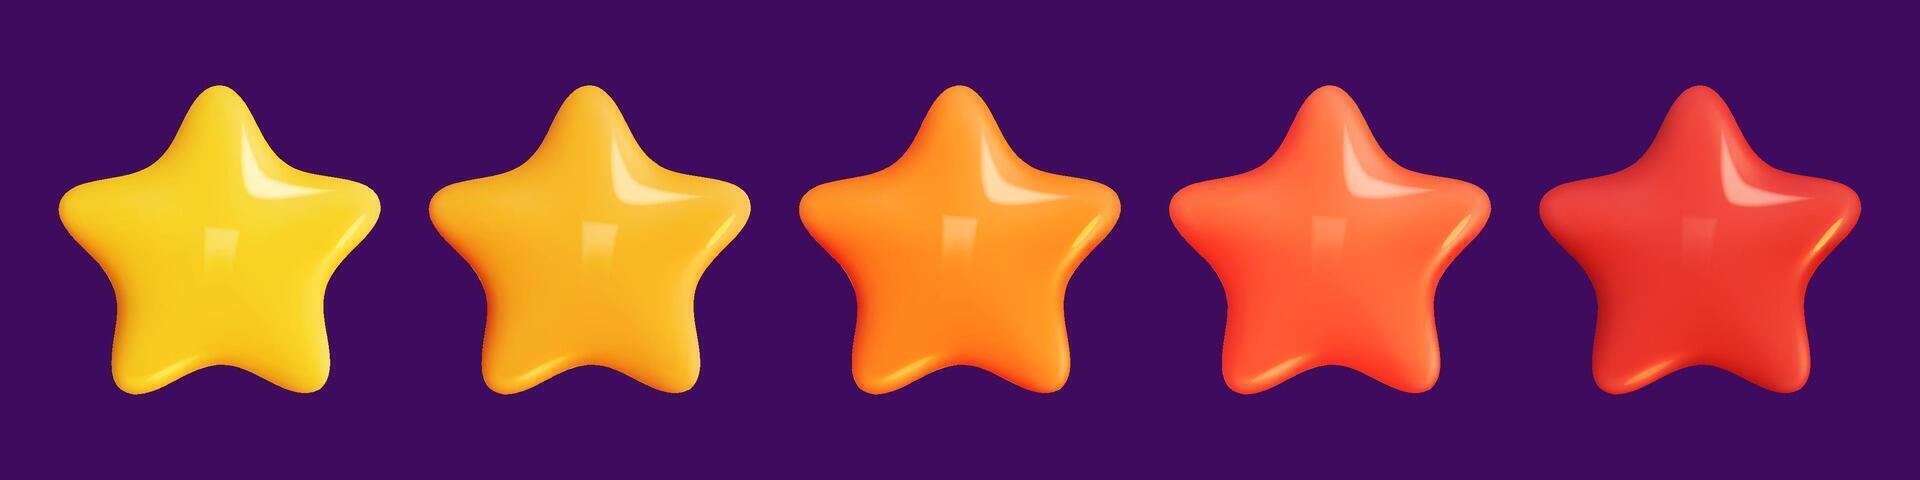 Star 3D Review plastic render. Set star for feedback and rank. 3d cartoon game element. Shape for app and game design. illustration. vector